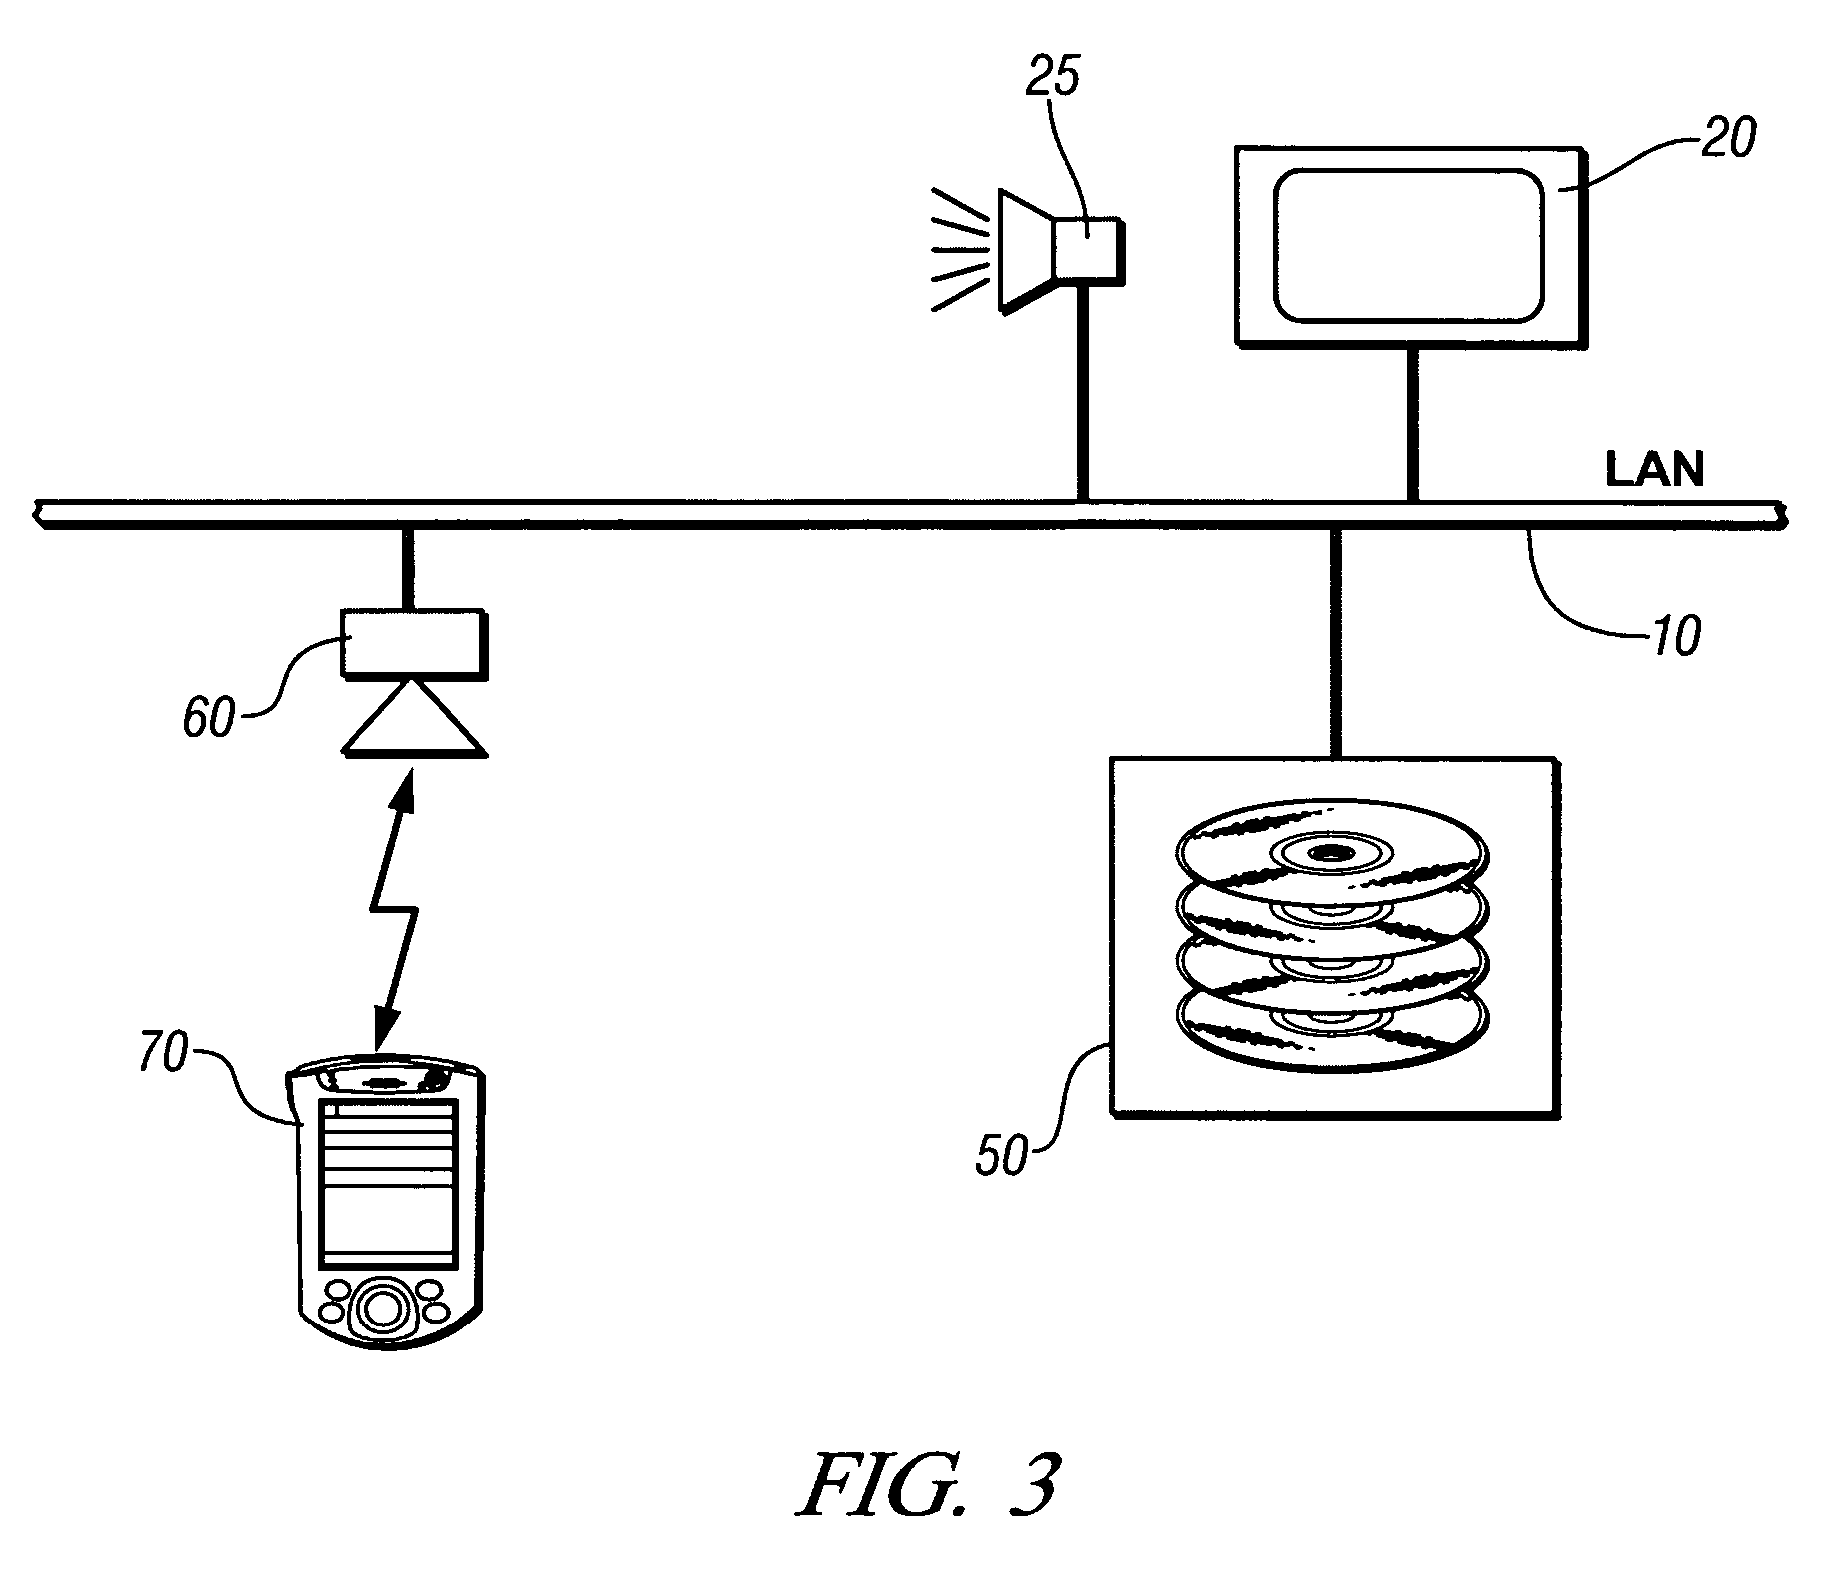 Method and apparatus to provide vehicle information to a requestor